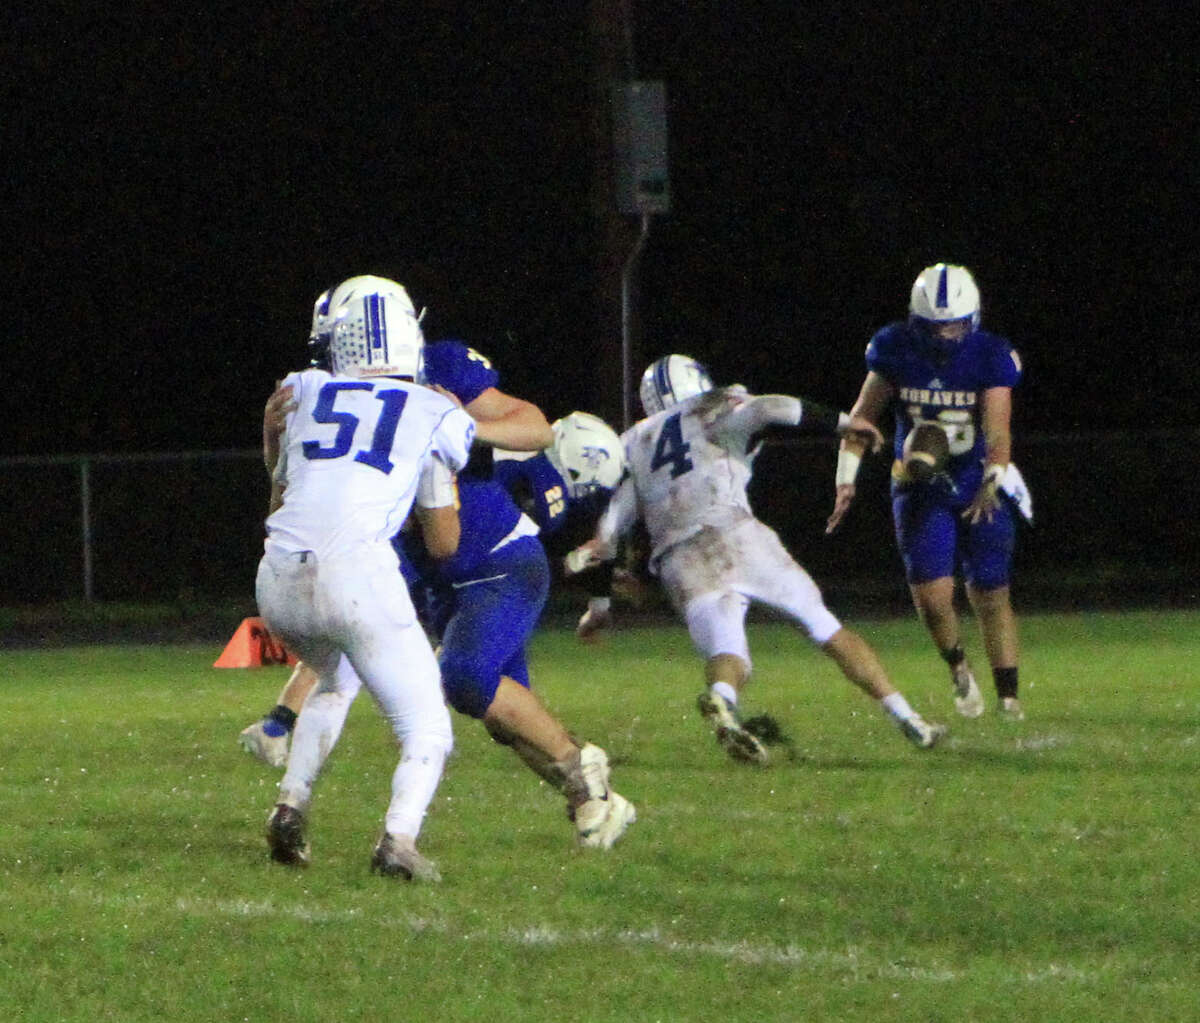 The Morley Stanwood football team was defeated 36-0 by Beal City in teh final game of the regular season Friday night.